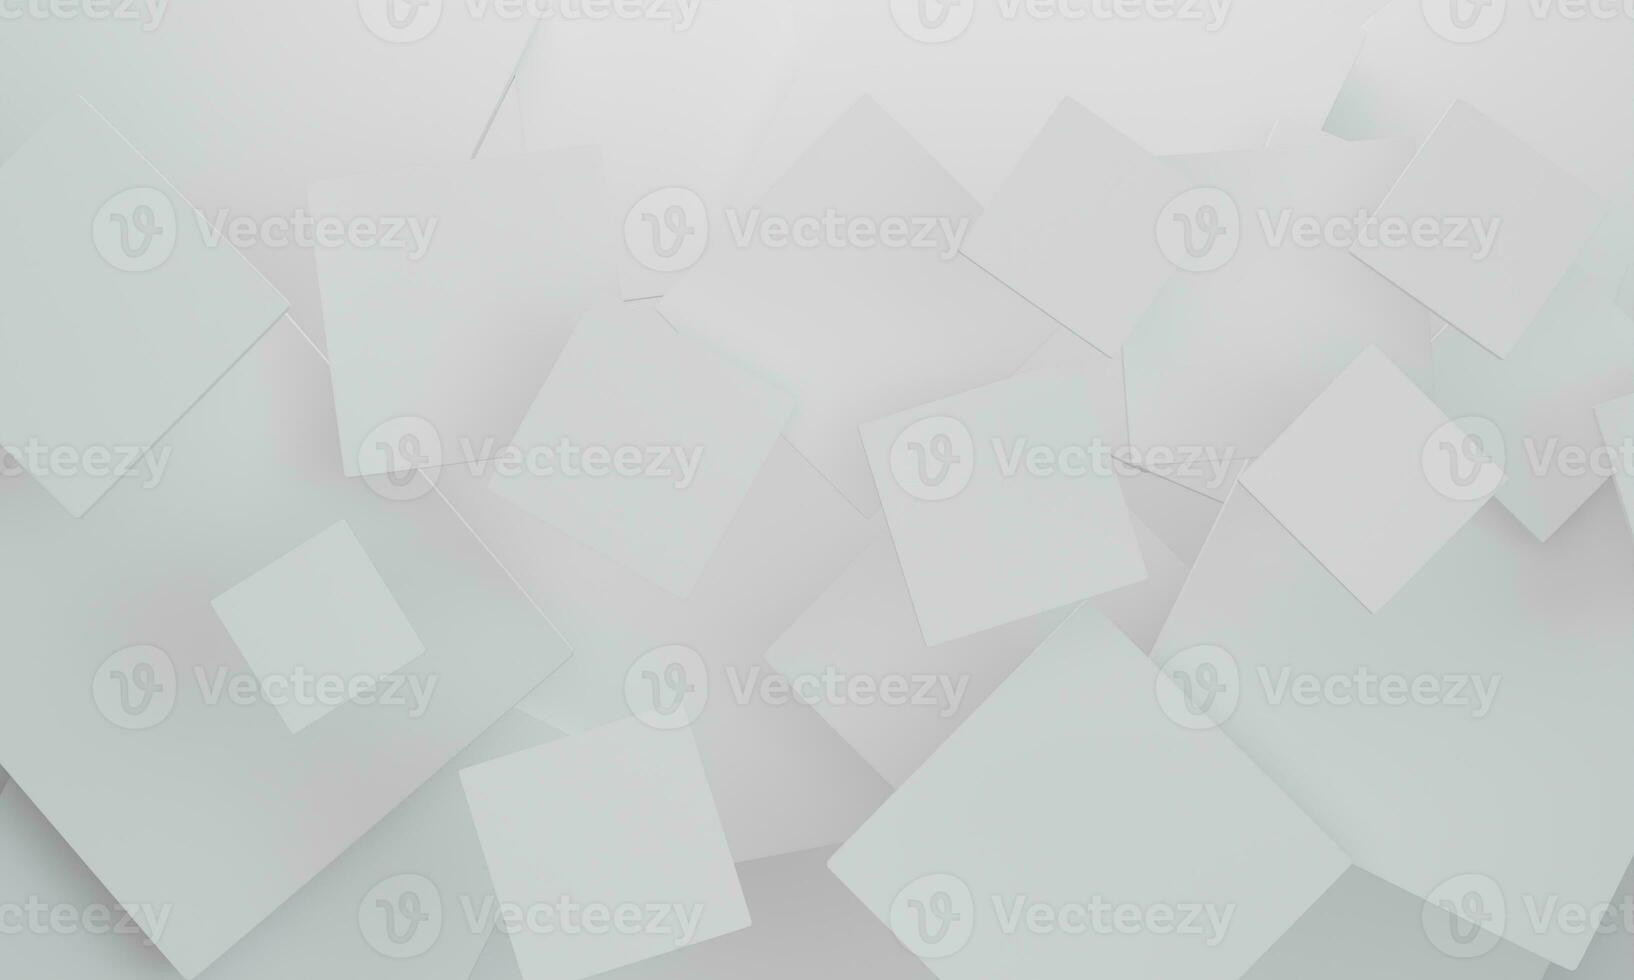 Abstract geometric white color texture background. 3d rendering. photo